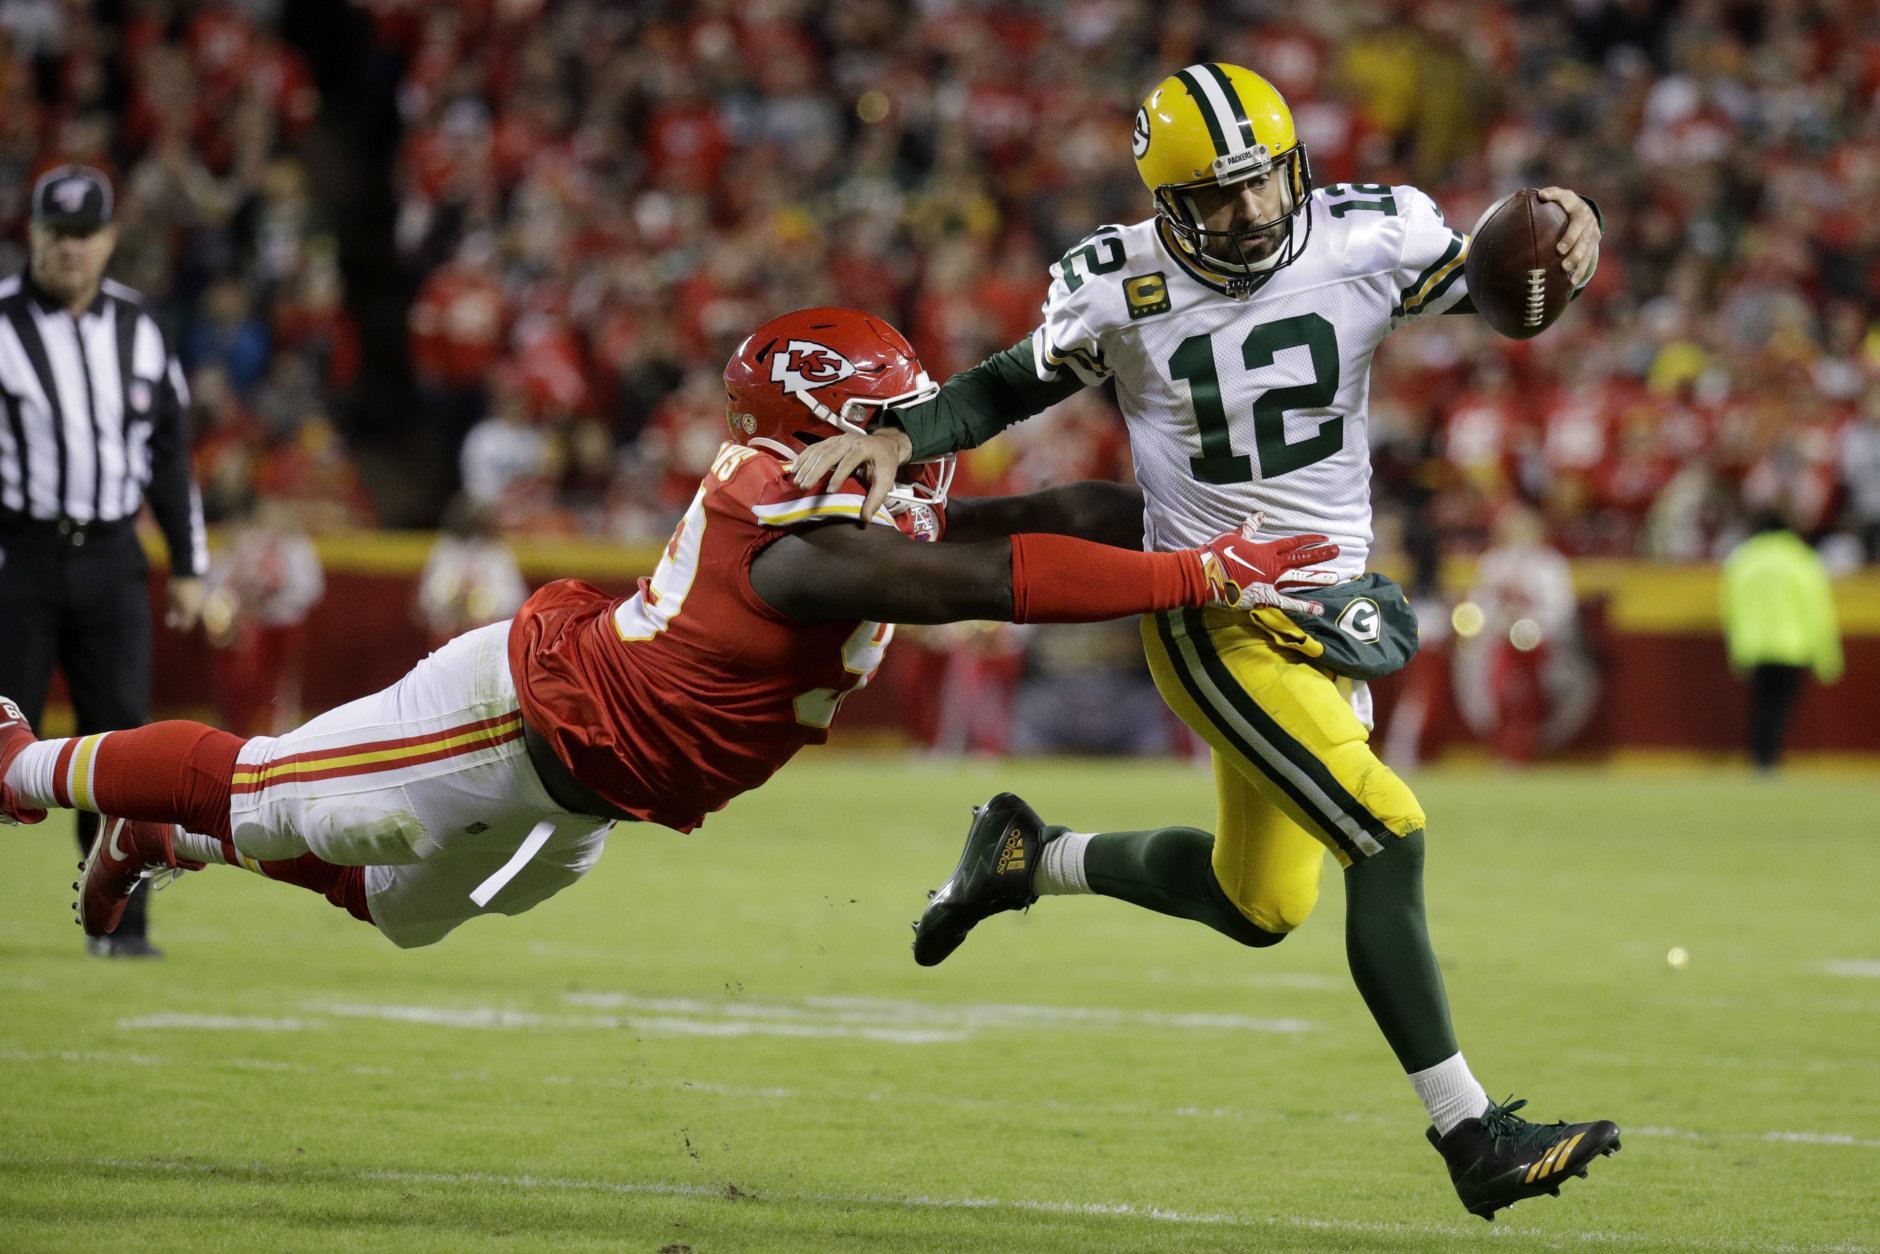 <p><b><i>Packers 34</i></b><br />
<b><i>Chiefs 27</i></b></p>
<p>Aaron Rodgers <a href="https://profootballtalk.nbcsports.com/2019/10/26/aaron-rodgers-enjoys-young-energy-in-green-bay/">loves the young energy around him</a>, but he&#8217;s giving off vibes much younger than his 35-plus years. That&#8217;s probably because after most of the last decade, he&#8217;s finally got a solid defense and a running back (Aaron Jones) capable of carrying the load so Rodgers doesn&#8217;t have to. I know Patrick Mahomes was absent from this prime-time matchup, but Green Bay looks legit — almost as legit as this ridiculous TD pass.</p>
<blockquote class="twitter-tweet">
<p dir="ltr" lang="en">Unreal.<a href="https://twitter.com/AaronRodgers12?ref_src=twsrc%5Etfw">@AaronRodgers12</a> magic on SNF! <a href="https://twitter.com/hashtag/GBvsKC?src=hash&amp;ref_src=twsrc%5Etfw">#GBvsKC</a> | <a href="https://twitter.com/hashtag/GoPackGo?src=hash&amp;ref_src=twsrc%5Etfw">#GoPackGo</a> <a href="https://t.co/OzFFykBX0A">pic.twitter.com/OzFFykBX0A</a></p>
<p>— Green Bay Packers (@packers) <a href="https://twitter.com/packers/status/1188649385061732357?ref_src=twsrc%5Etfw">October 28, 2019</a></p></blockquote>
<p><script async src="https://platform.twitter.com/widgets.js" charset="utf-8"></script></p>
